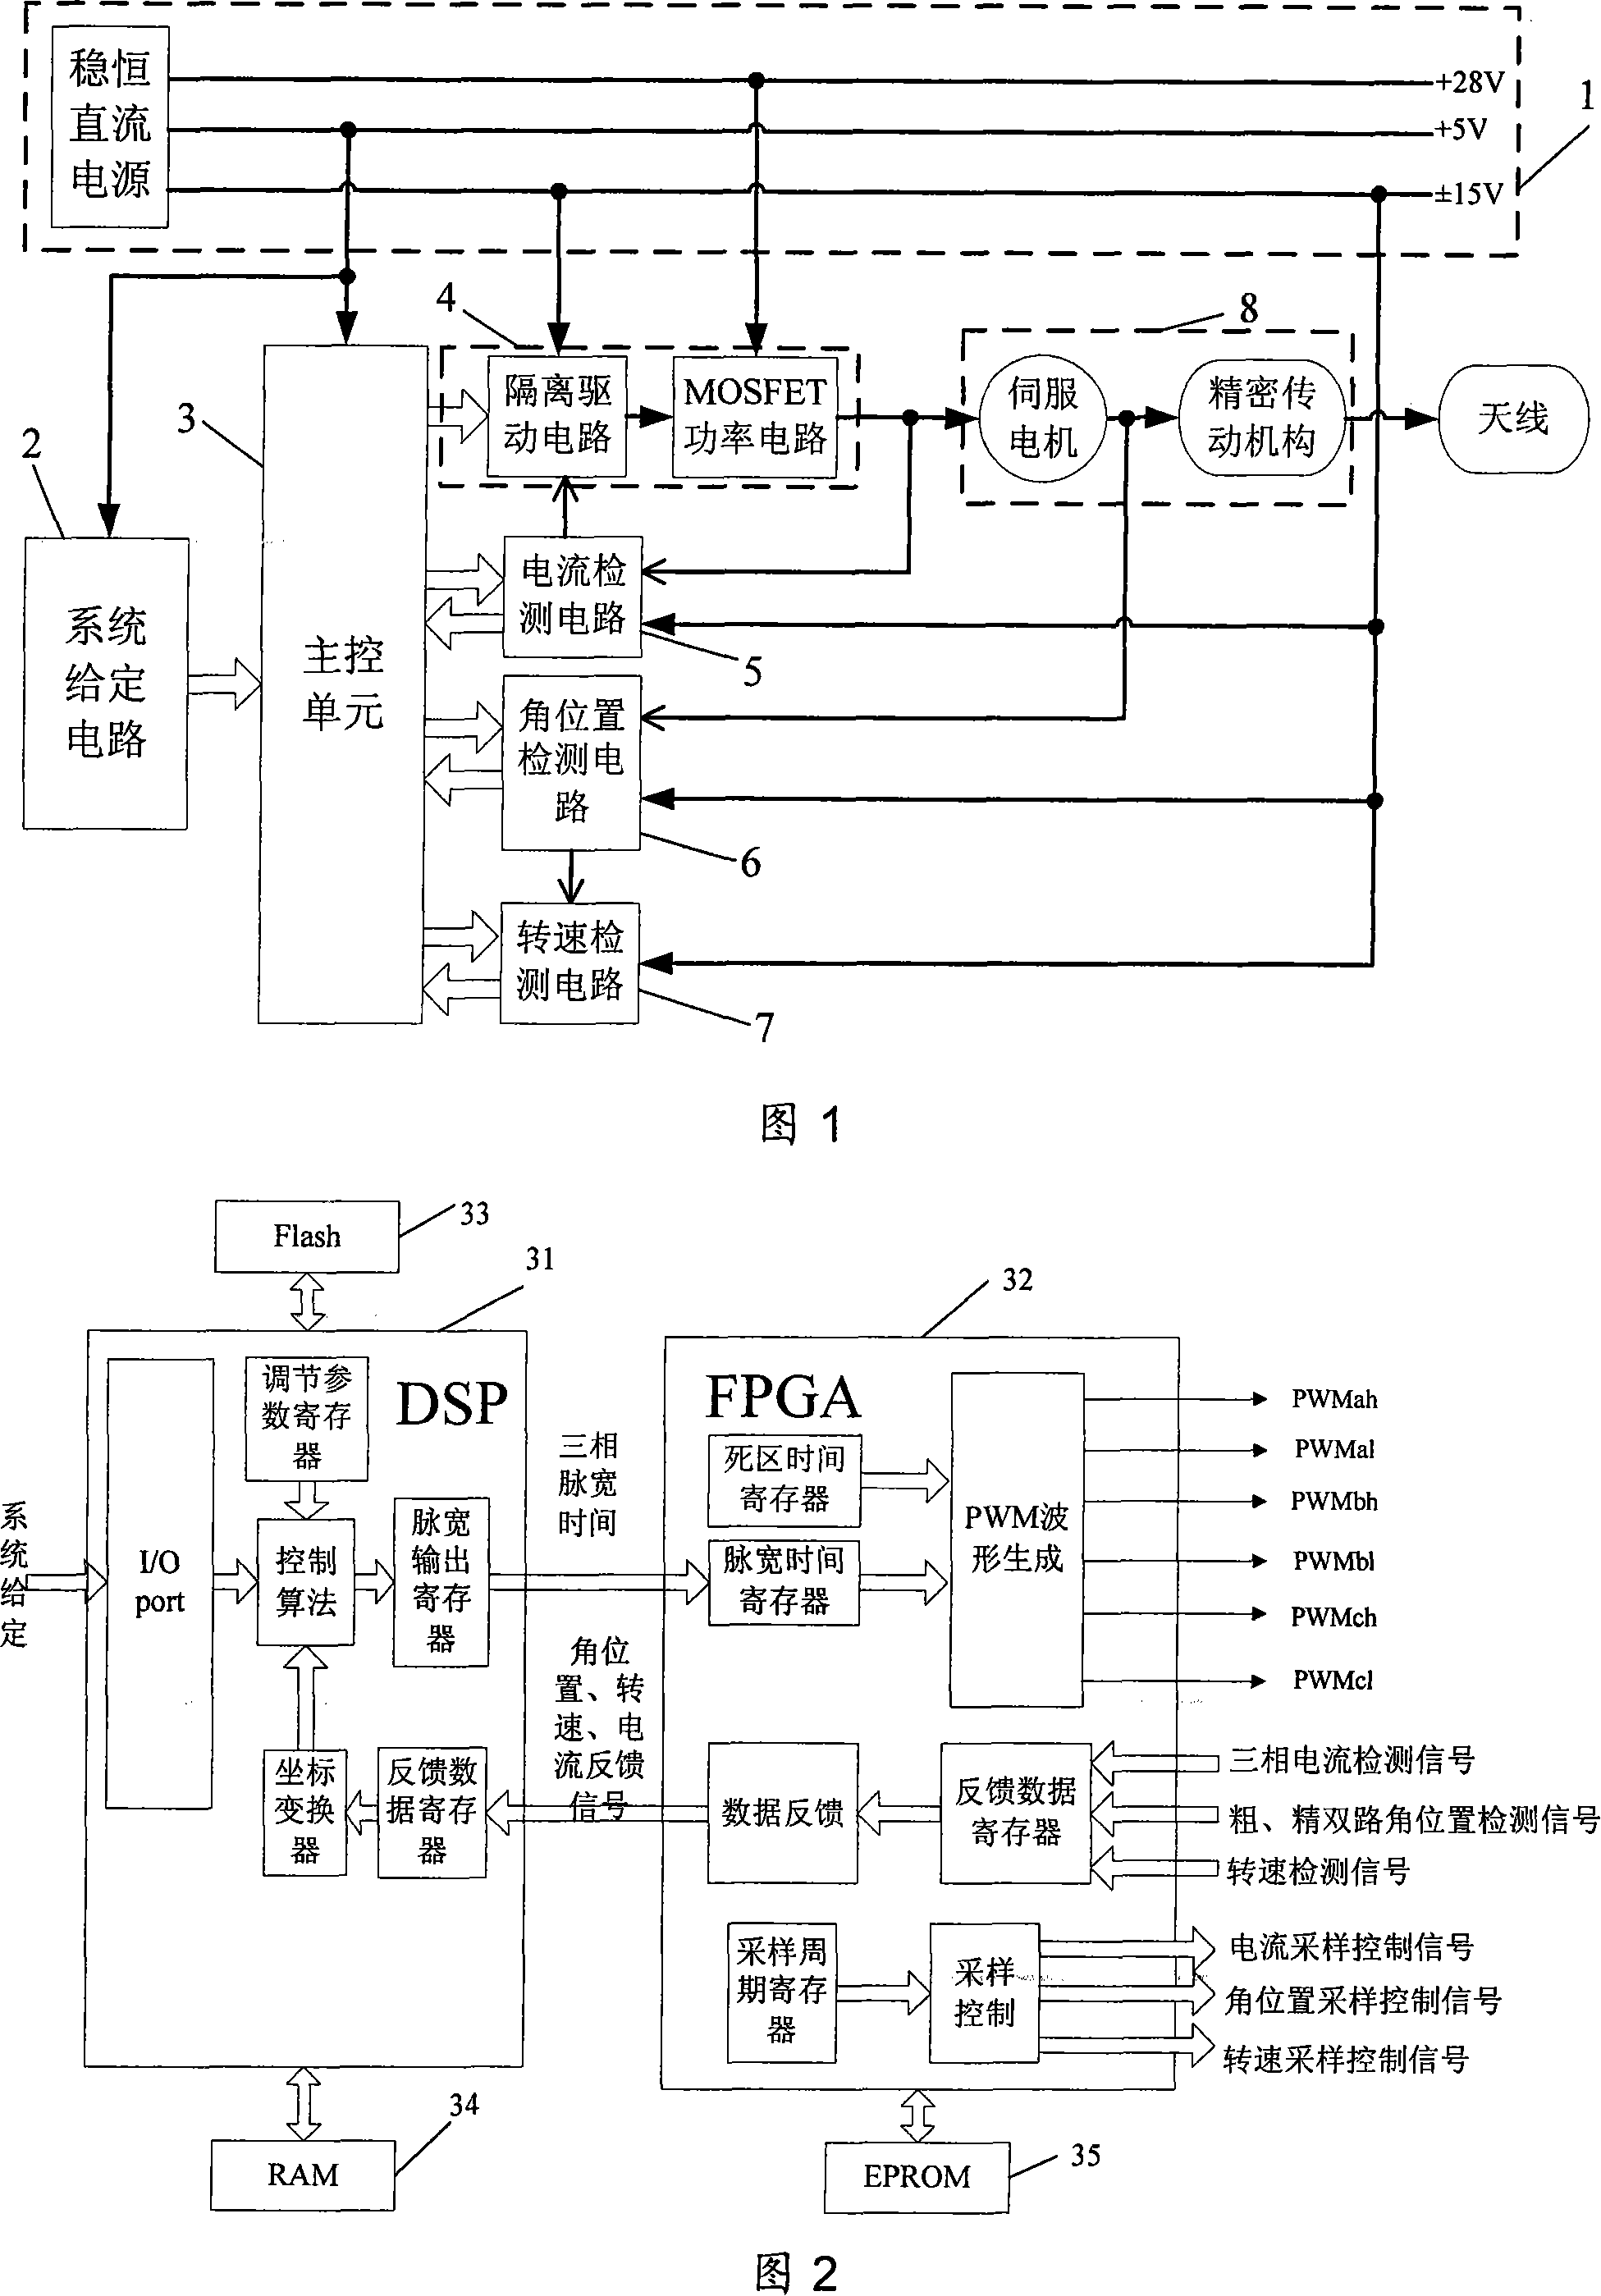 Control system for satellite antenna motion